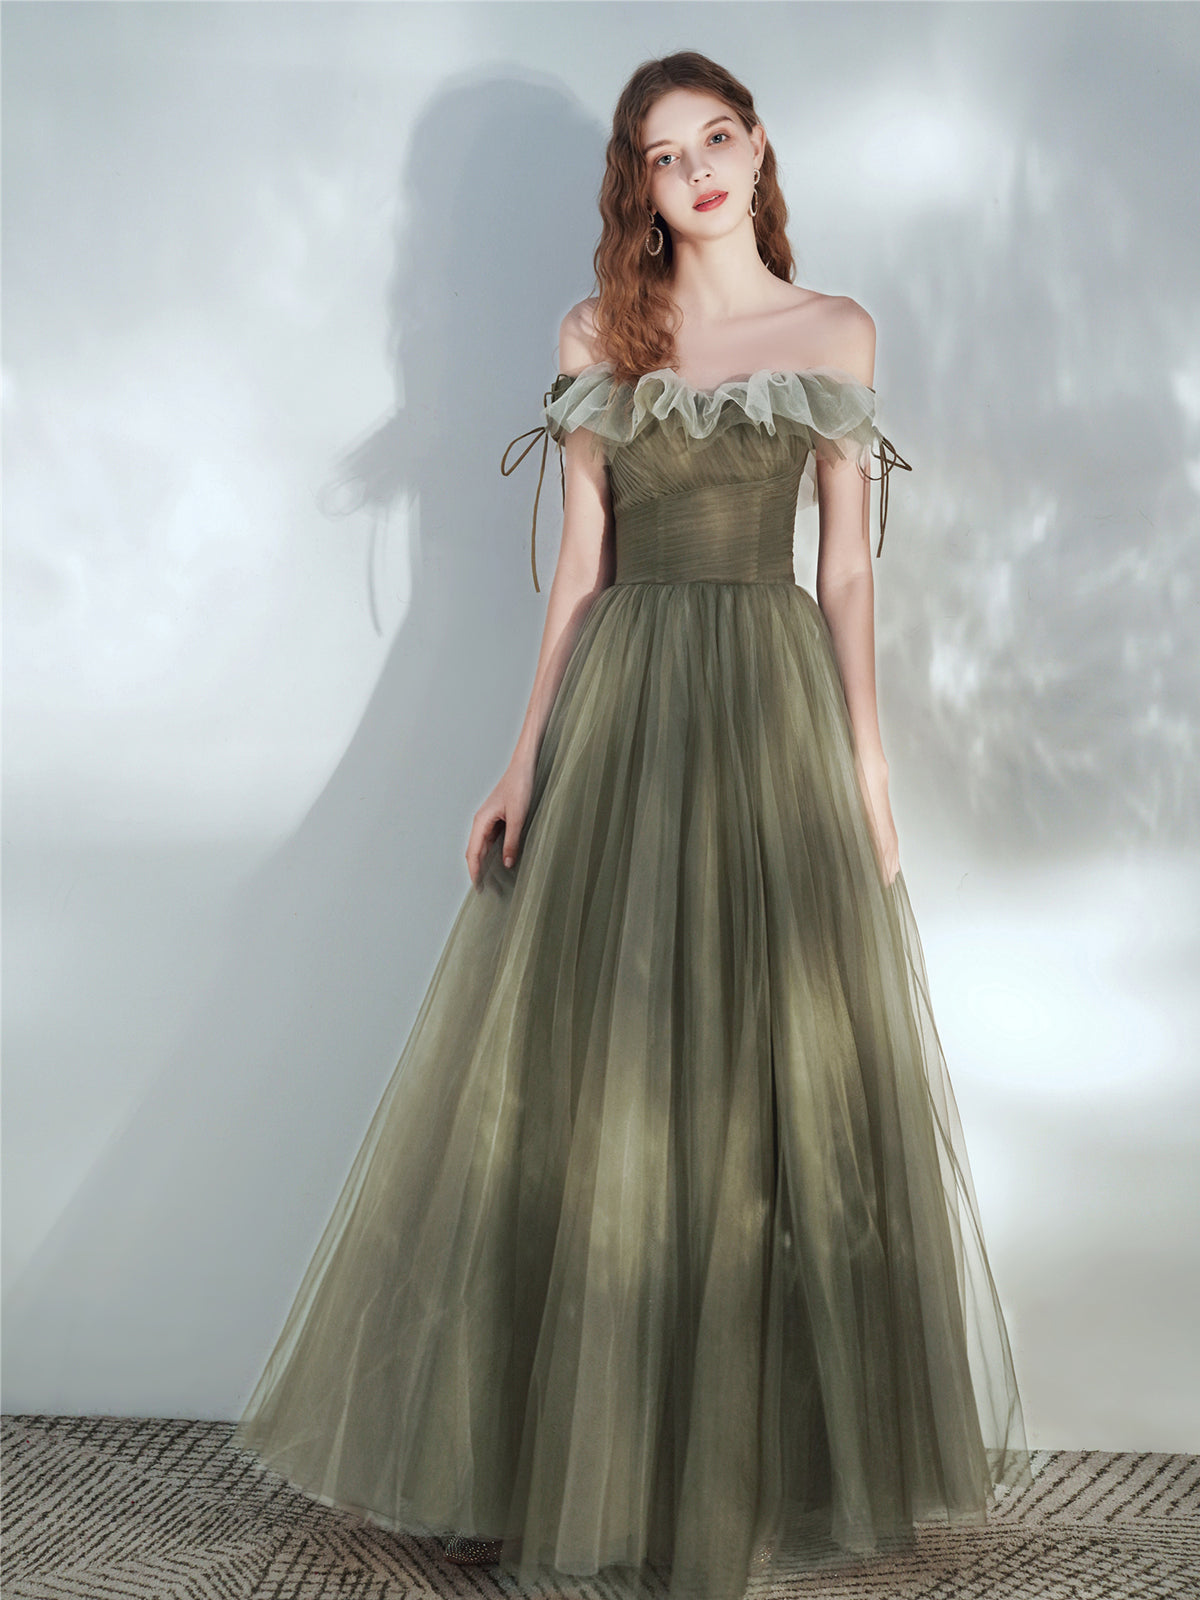 Olive Green Tulle Fairytale Long Prom Dress - DollyGown